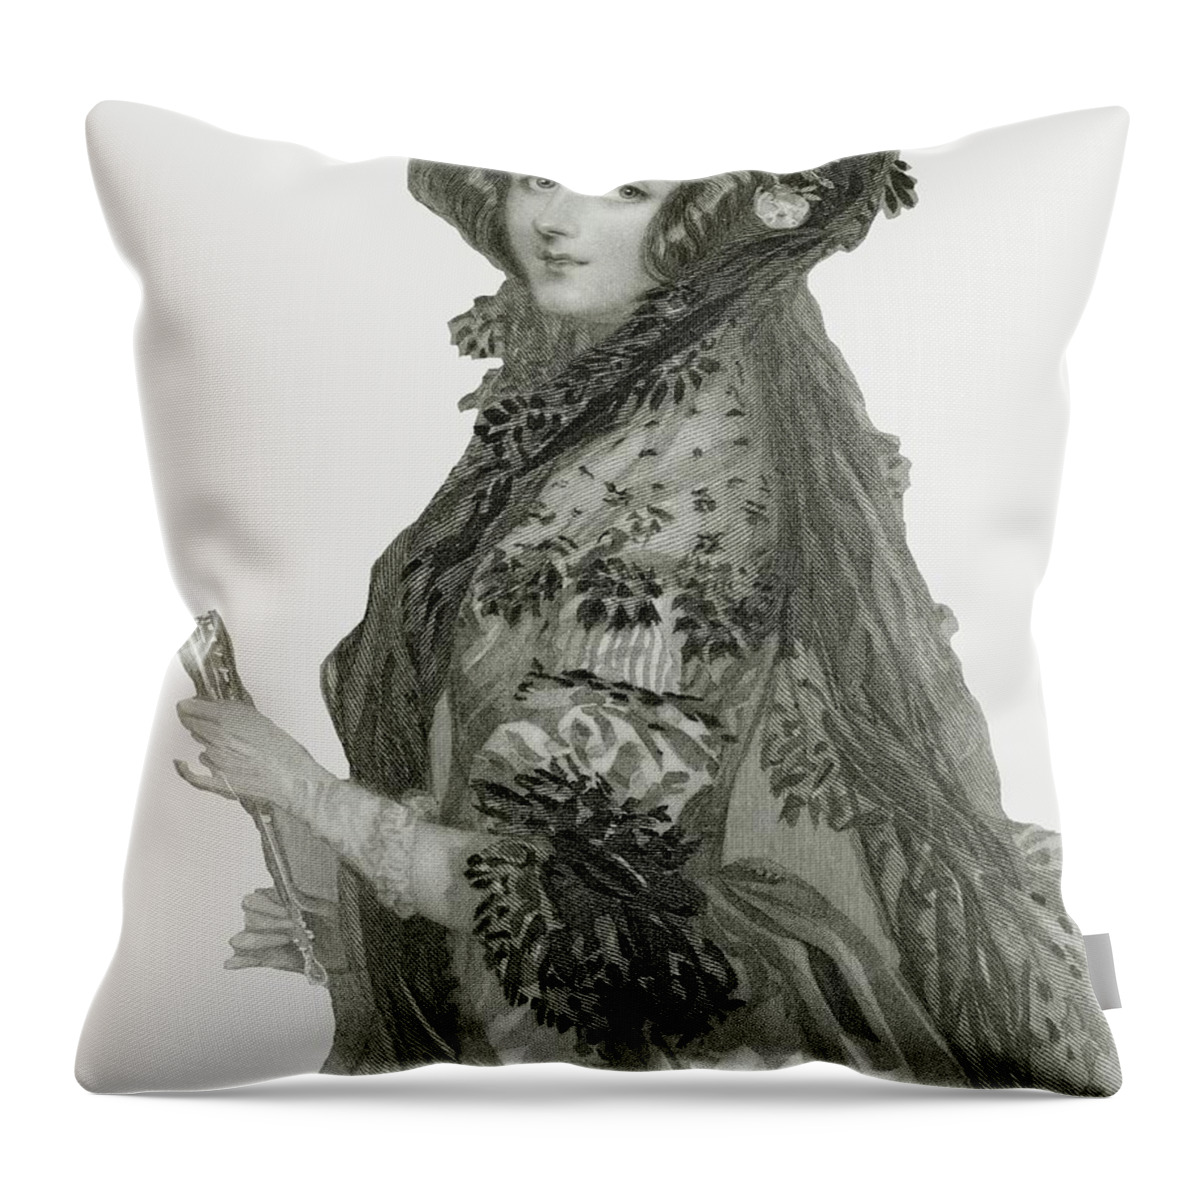 Ada Throw Pillow featuring the drawing Portrait Of Augusta Ada King 1815 - 1852, Countess Of Lovelace Engraving by Alfred-edward Chalon